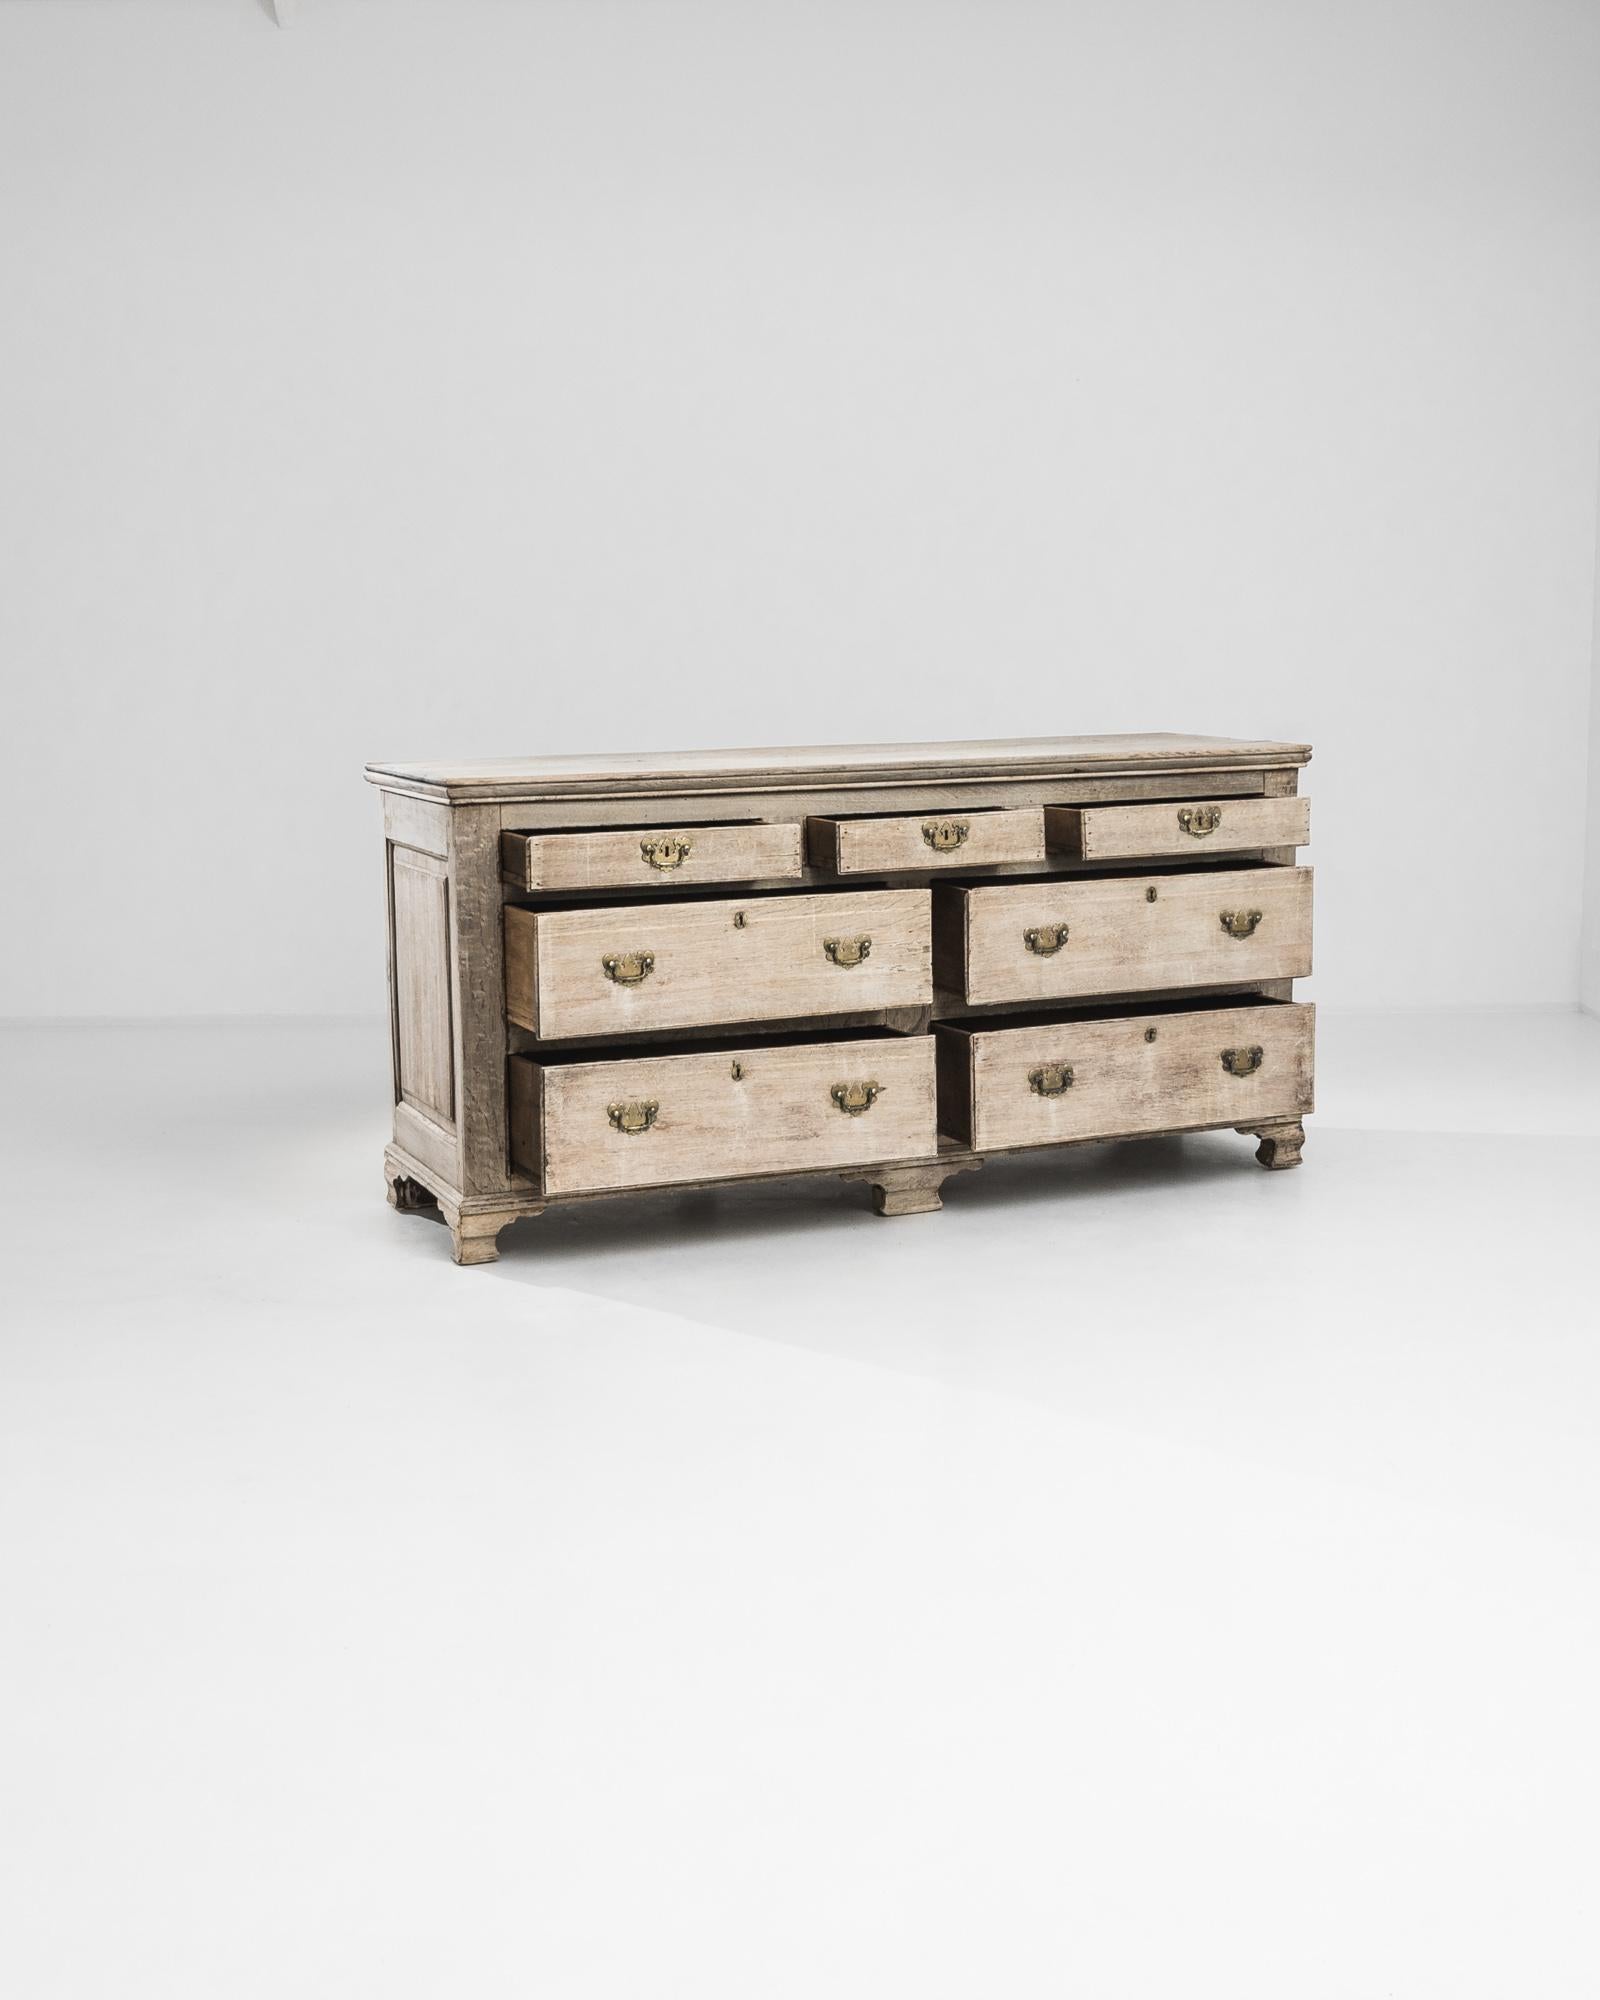 British 1820s English Bleached Oak Chest of Drawers